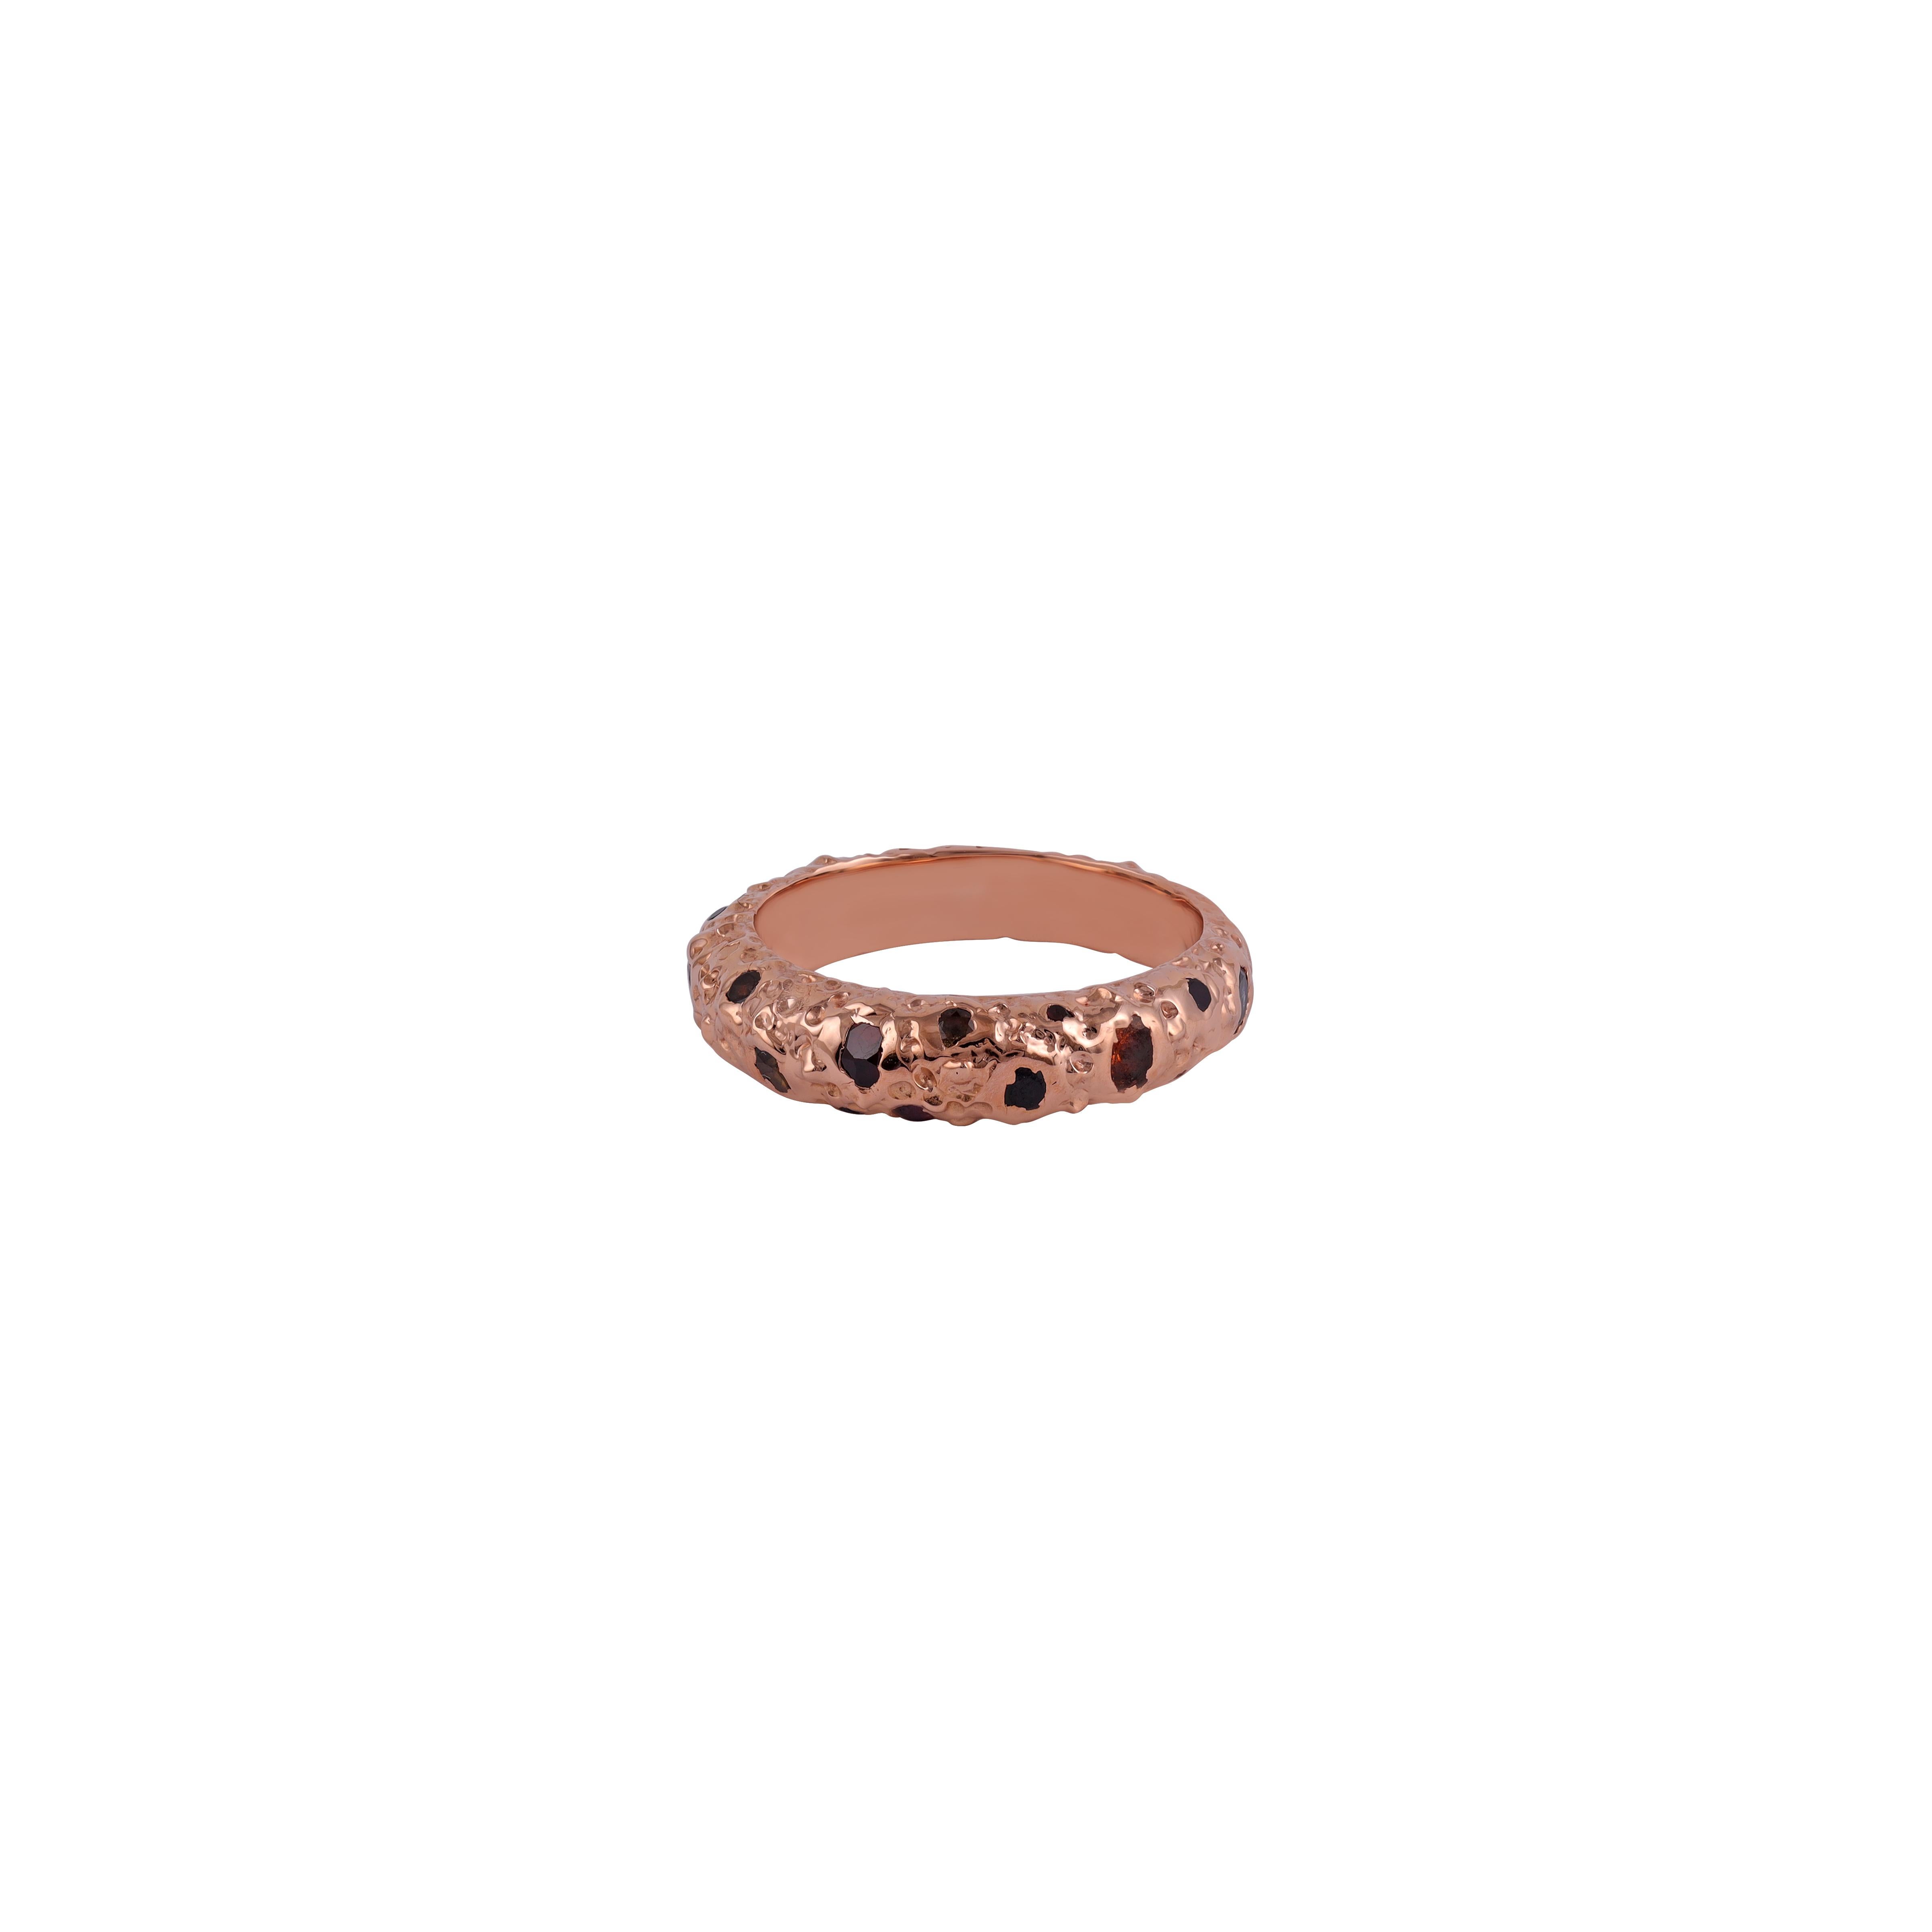 Handcrafted Round Sapphire Band
Multi Sapphire - 18pcs- 1.35 Cts
Ruby - 1pcs - 0.02 cts
18 Karat Rose Gold - 6.49 Grams


Custom Services
Resizing is available.
Request Customization